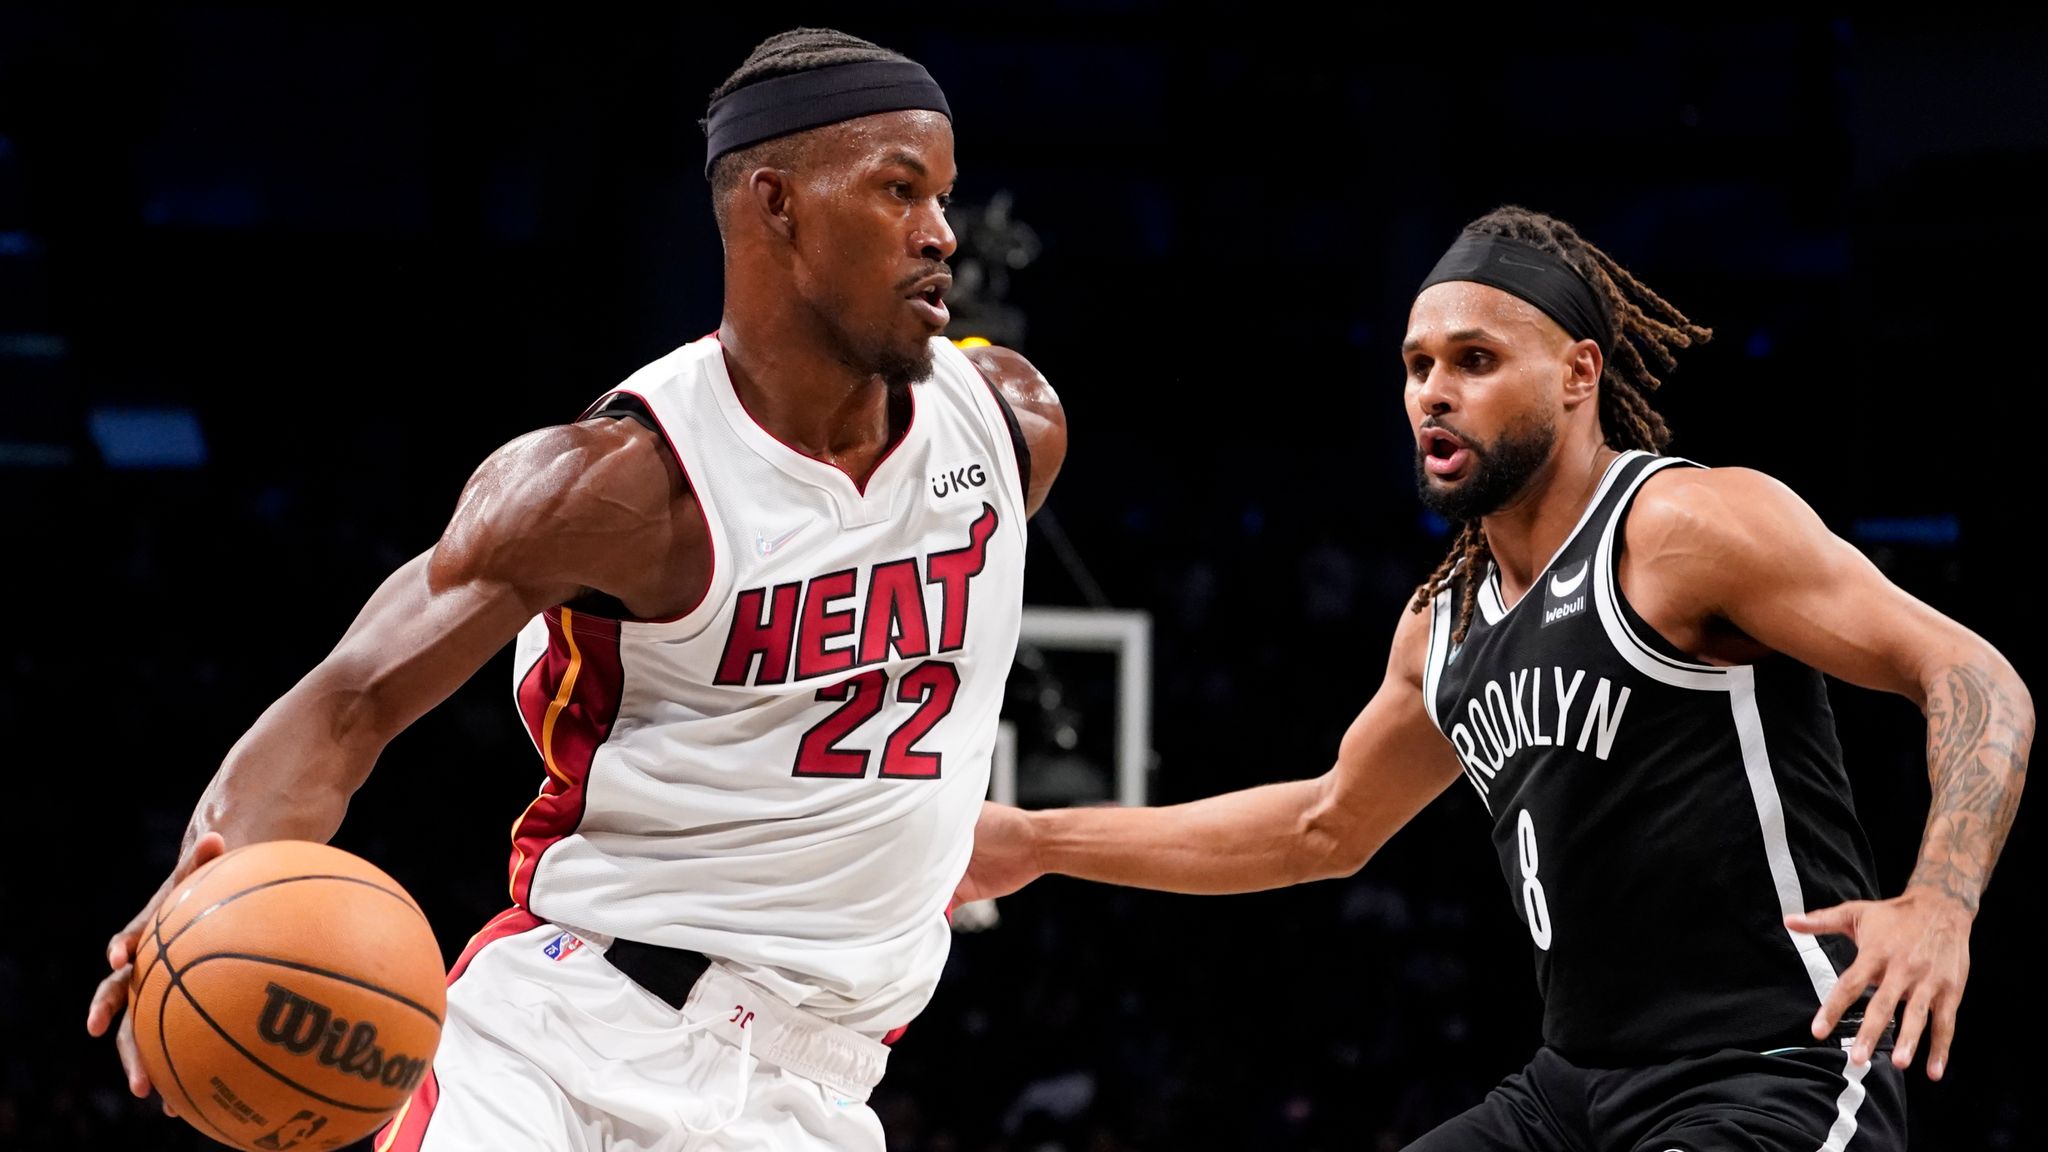 Nets welcome Heat in Preseason Game 2 at Barclays - NetsDaily